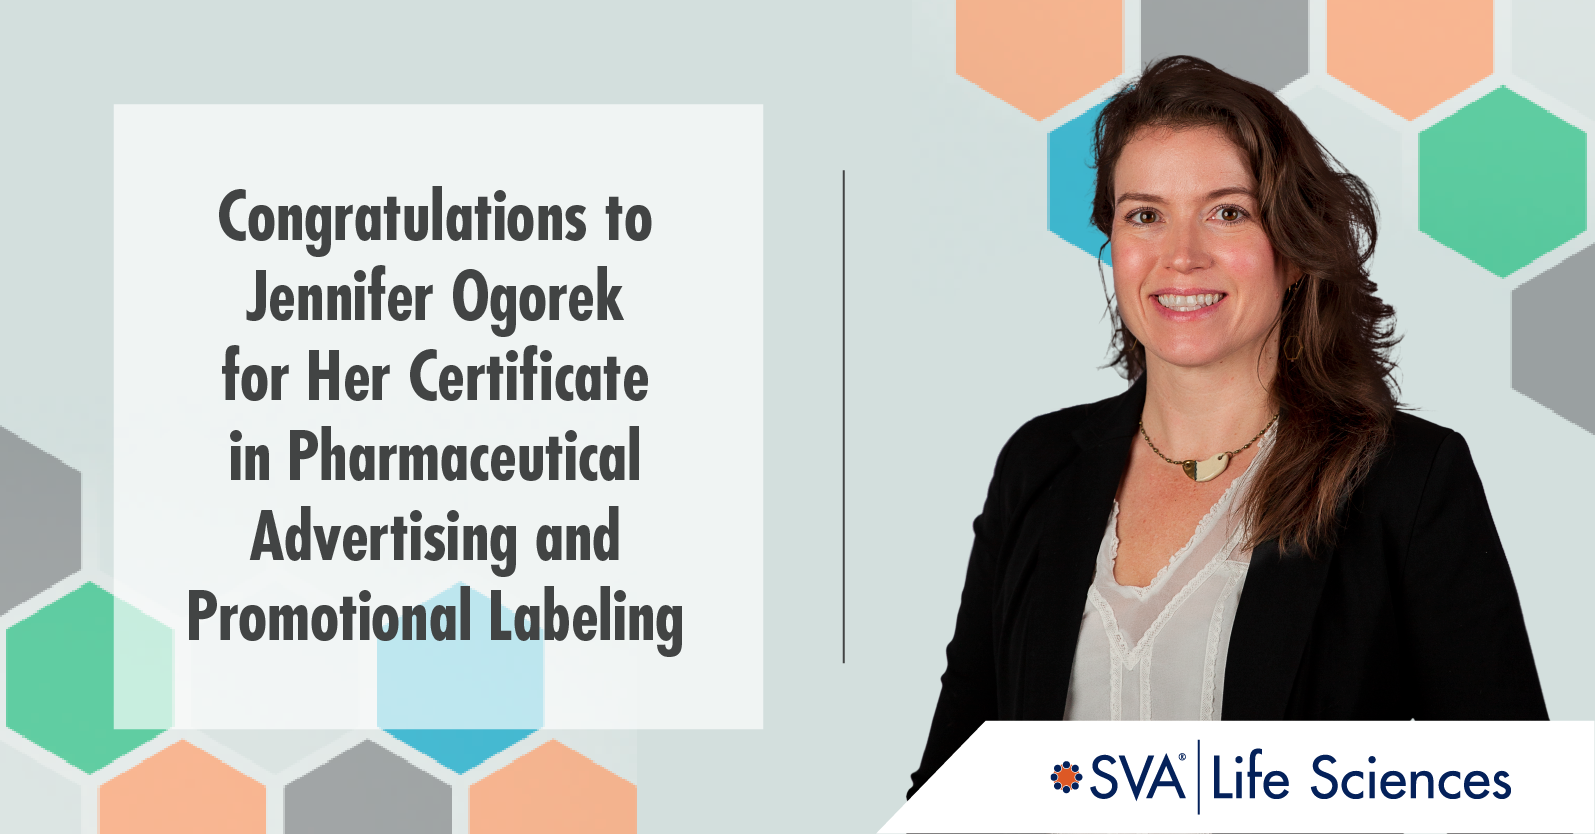 Congratulations to Jennifer Ogorek for her Certificate in Pharmaceutical Advertising and Promotional Labeling